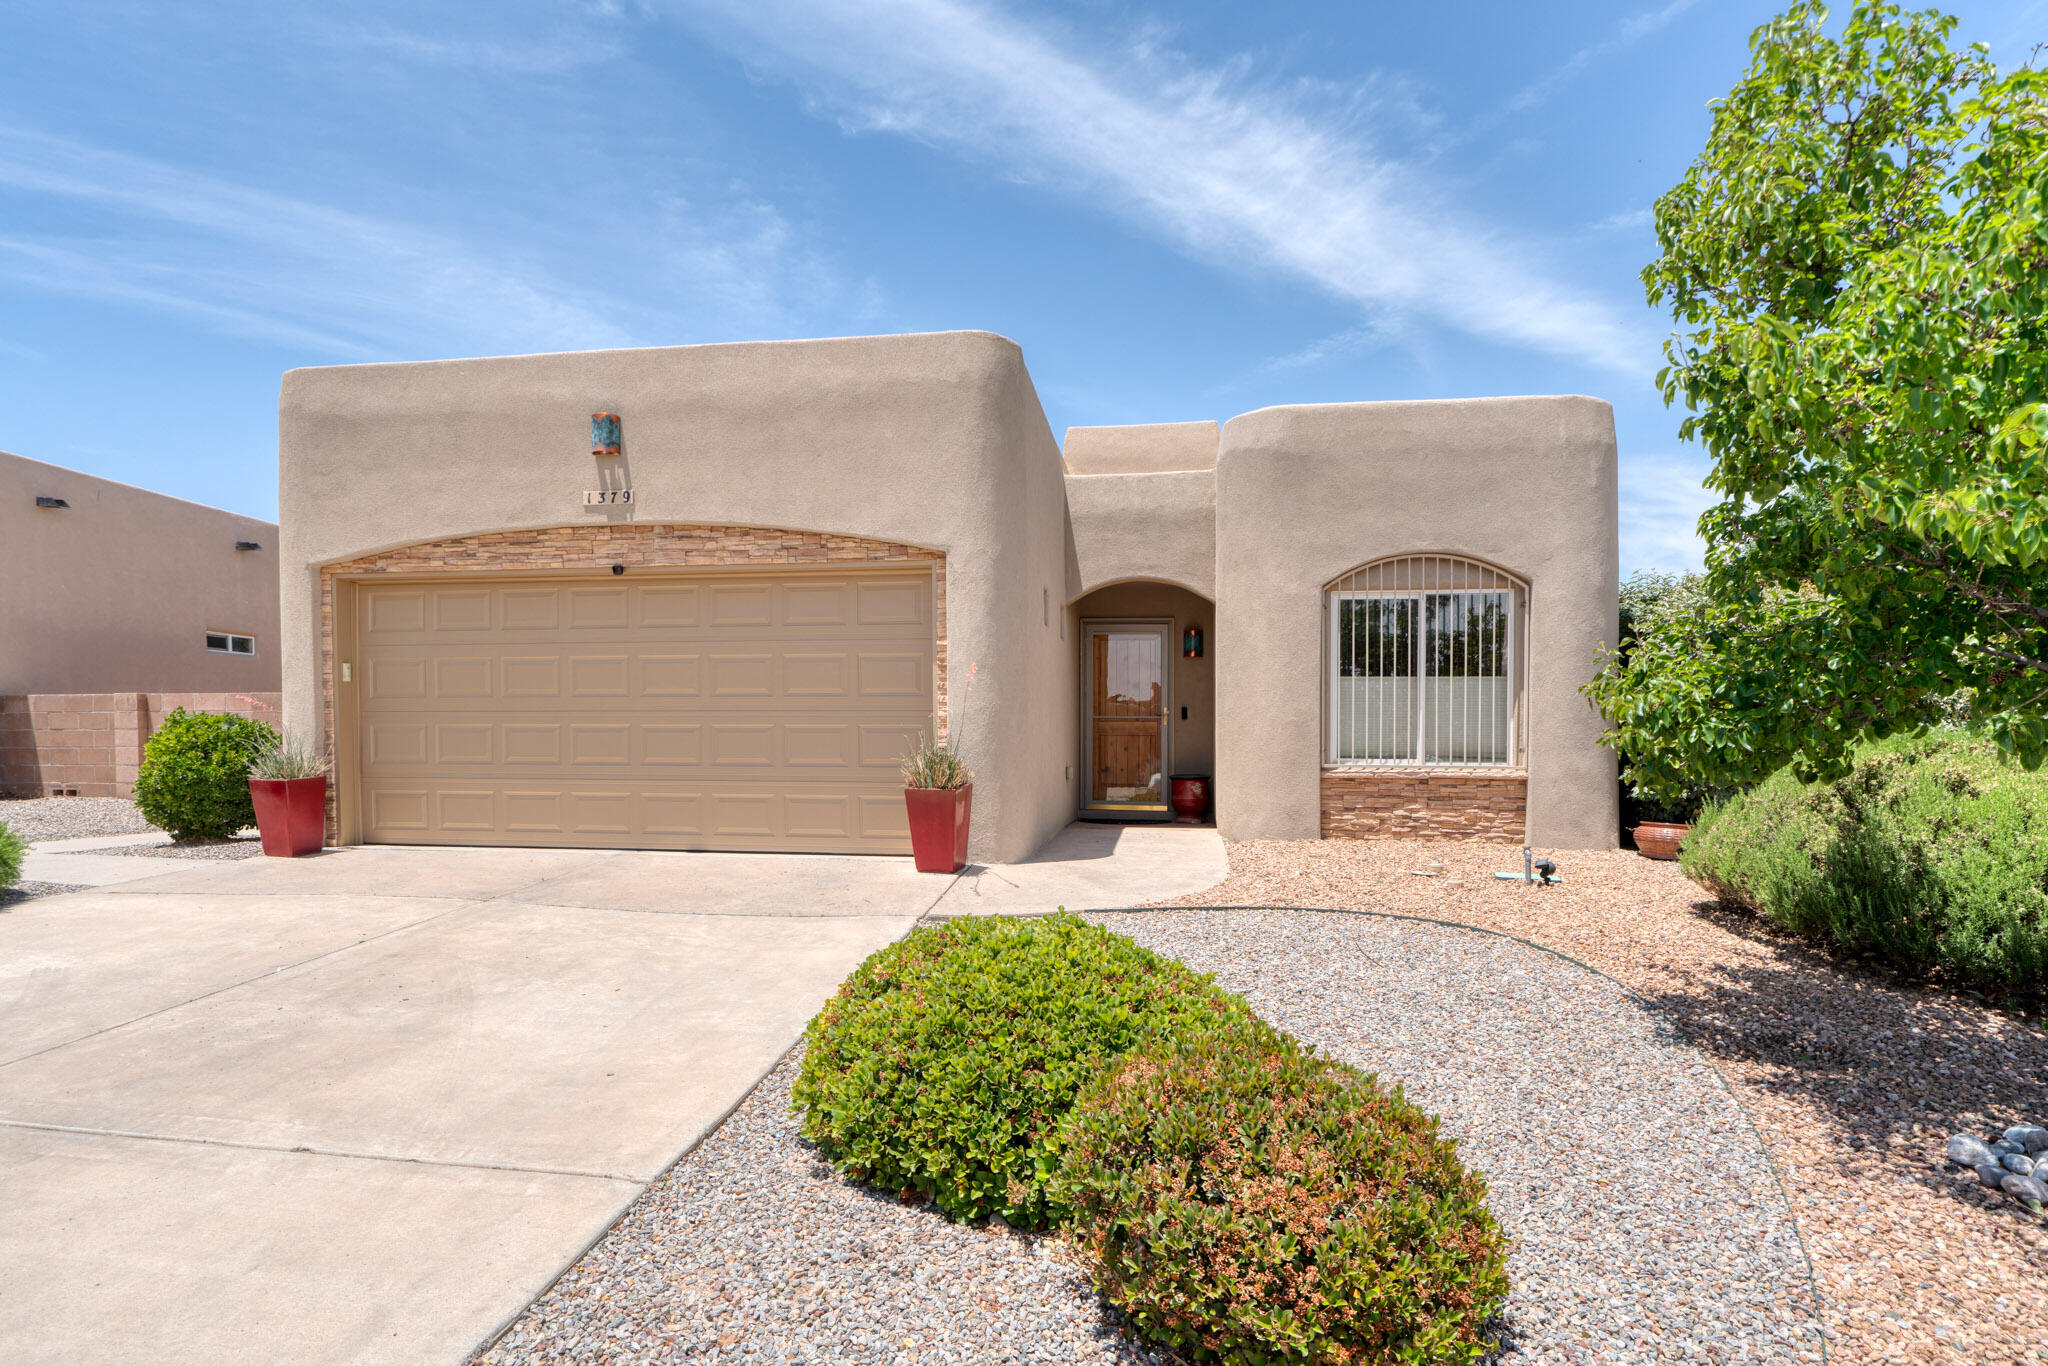 This single story Rio Rancho beauty is move in ready and located in the desirable Trinity estates (next to Intel). Walk in and enjoy the functional floorplan that offers 3 Bedrooms and 2 full bathrooms! The home offers, viga ceilings, a fireplace, granite counter tops, large double ovens and a gas cooktop! The private backyard is fully walled in with grass and a large covered patio! This property has a newer TPO roof and garage door (2018), New AC, New water Heater and all New water supply lines (PEX)! Call your favorite Realtor today to set up your own private showing!